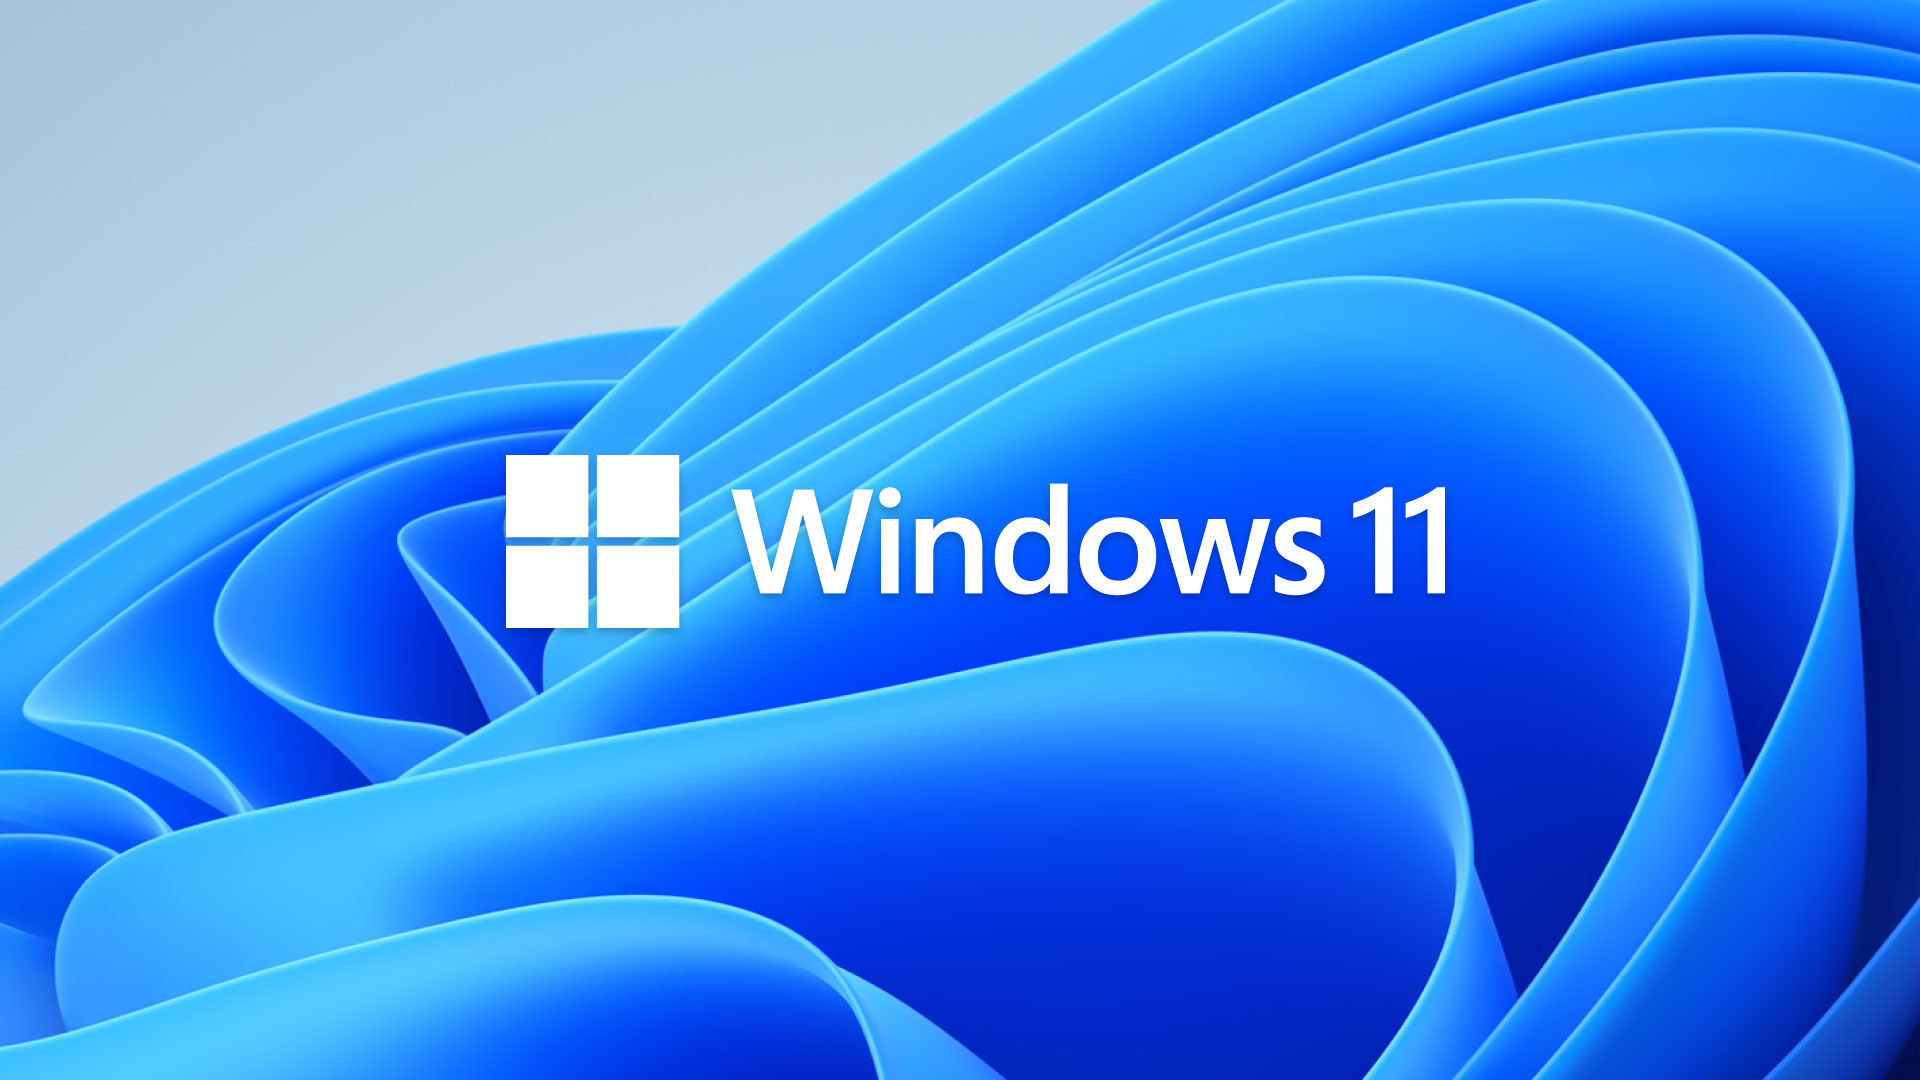 Windows Features Release Date And Price